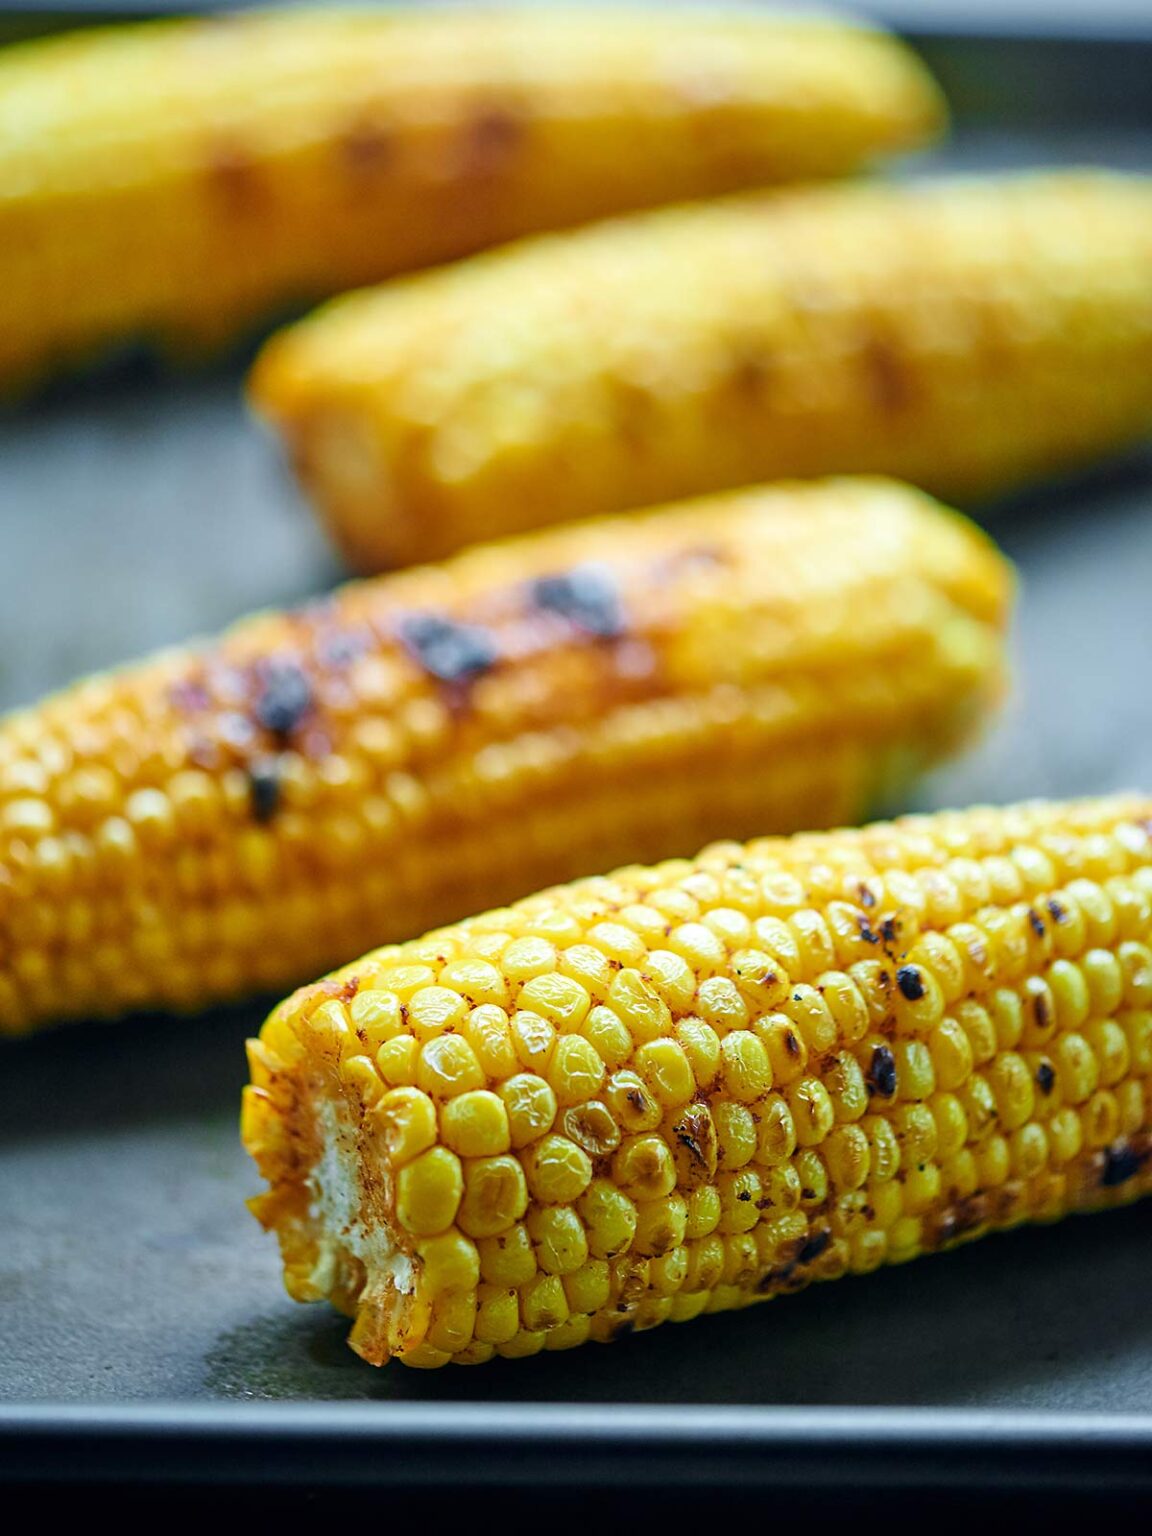 Mexican Grilled Corn Recipe - aka Mexican Street Corn or Elote